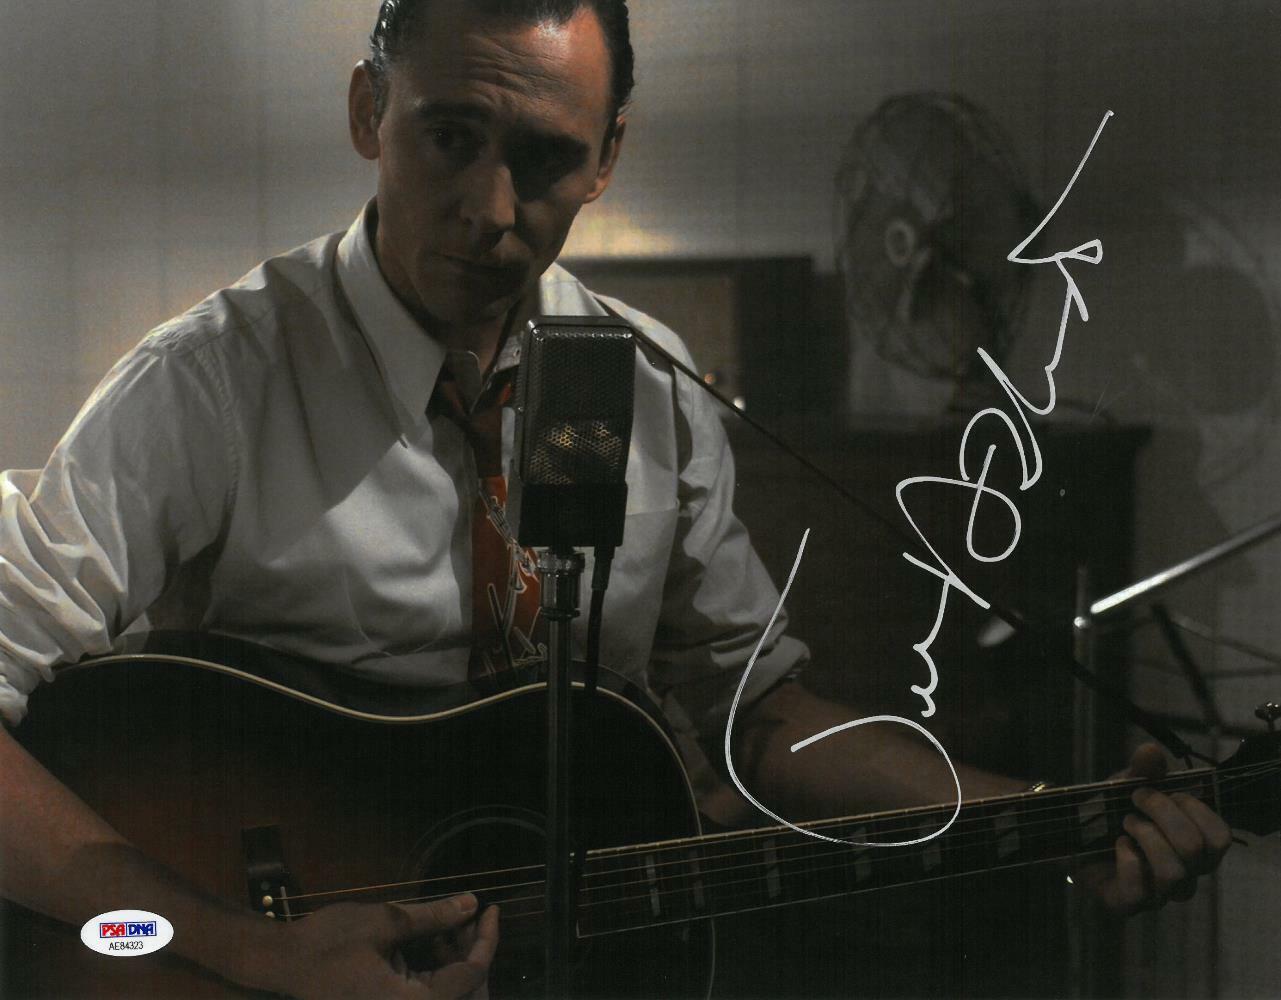 Tom Hiddleston Signed I Saw the Light Autographed 11x14 Photo Poster painting PSA/DNA #AE84323